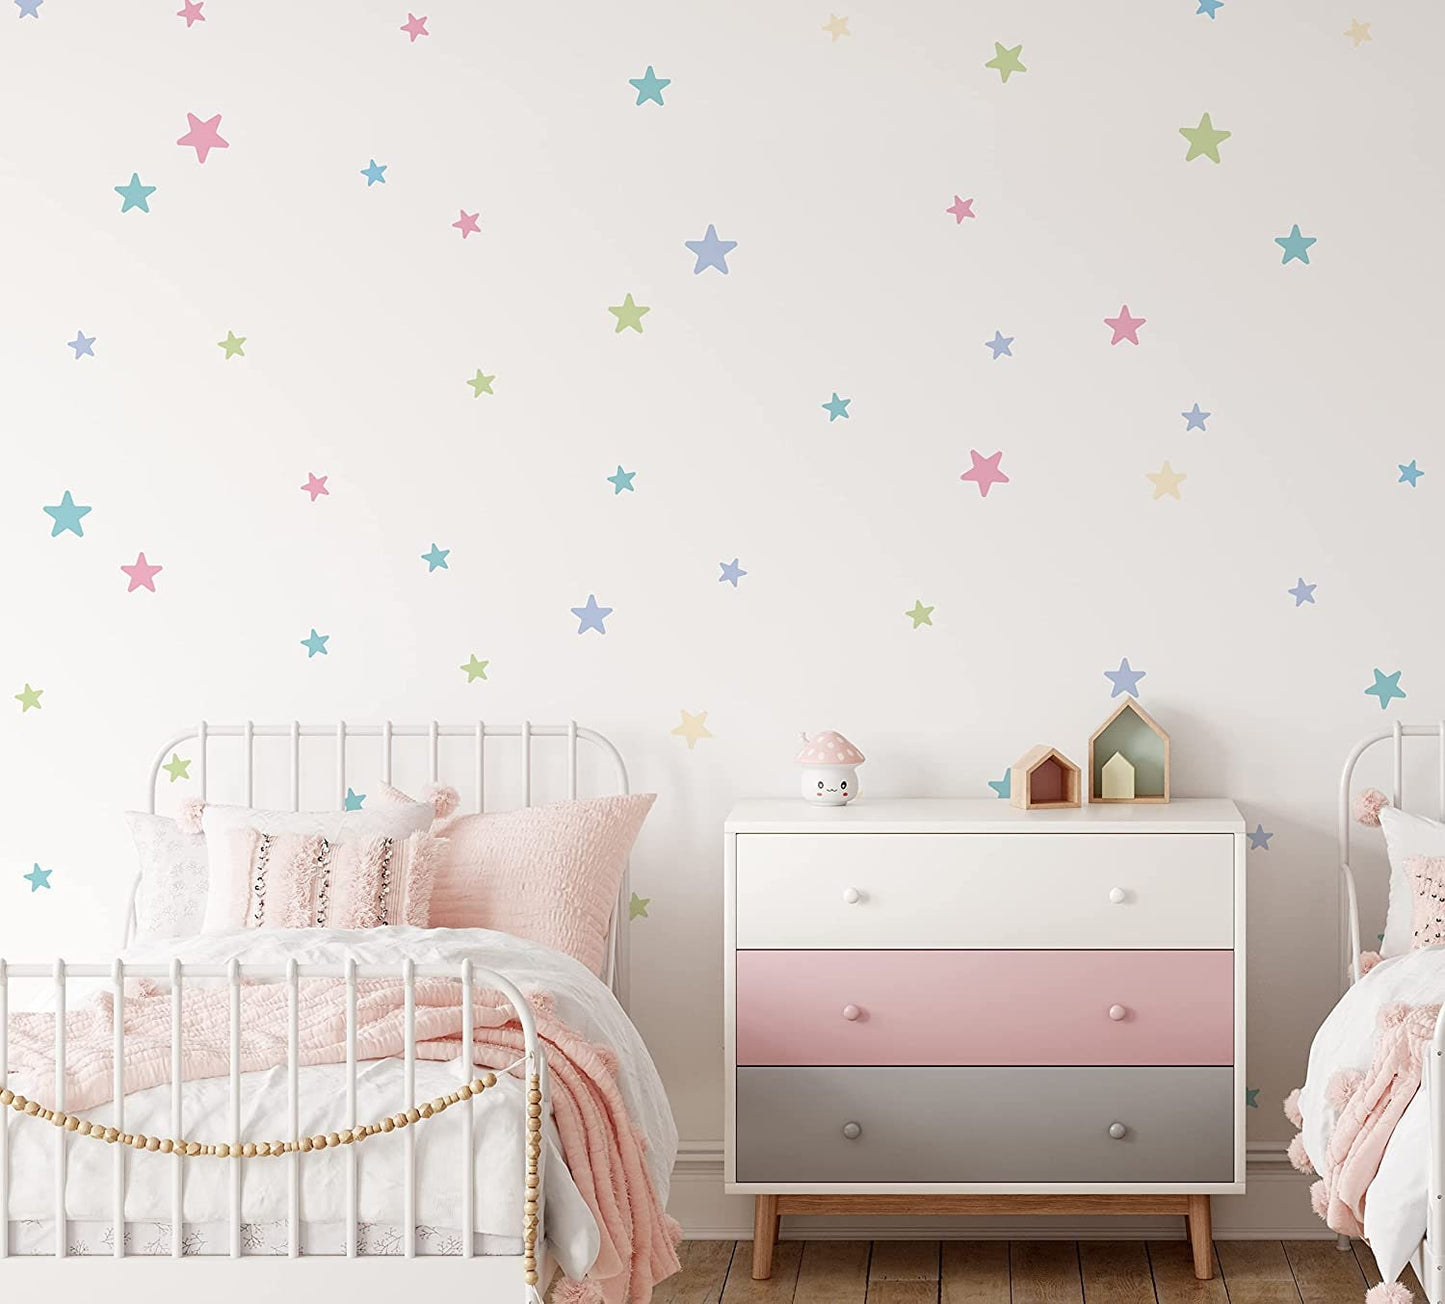 Star Stickers For Walls Kids Wall Stickers Decals Pastel Stars Removable Decor